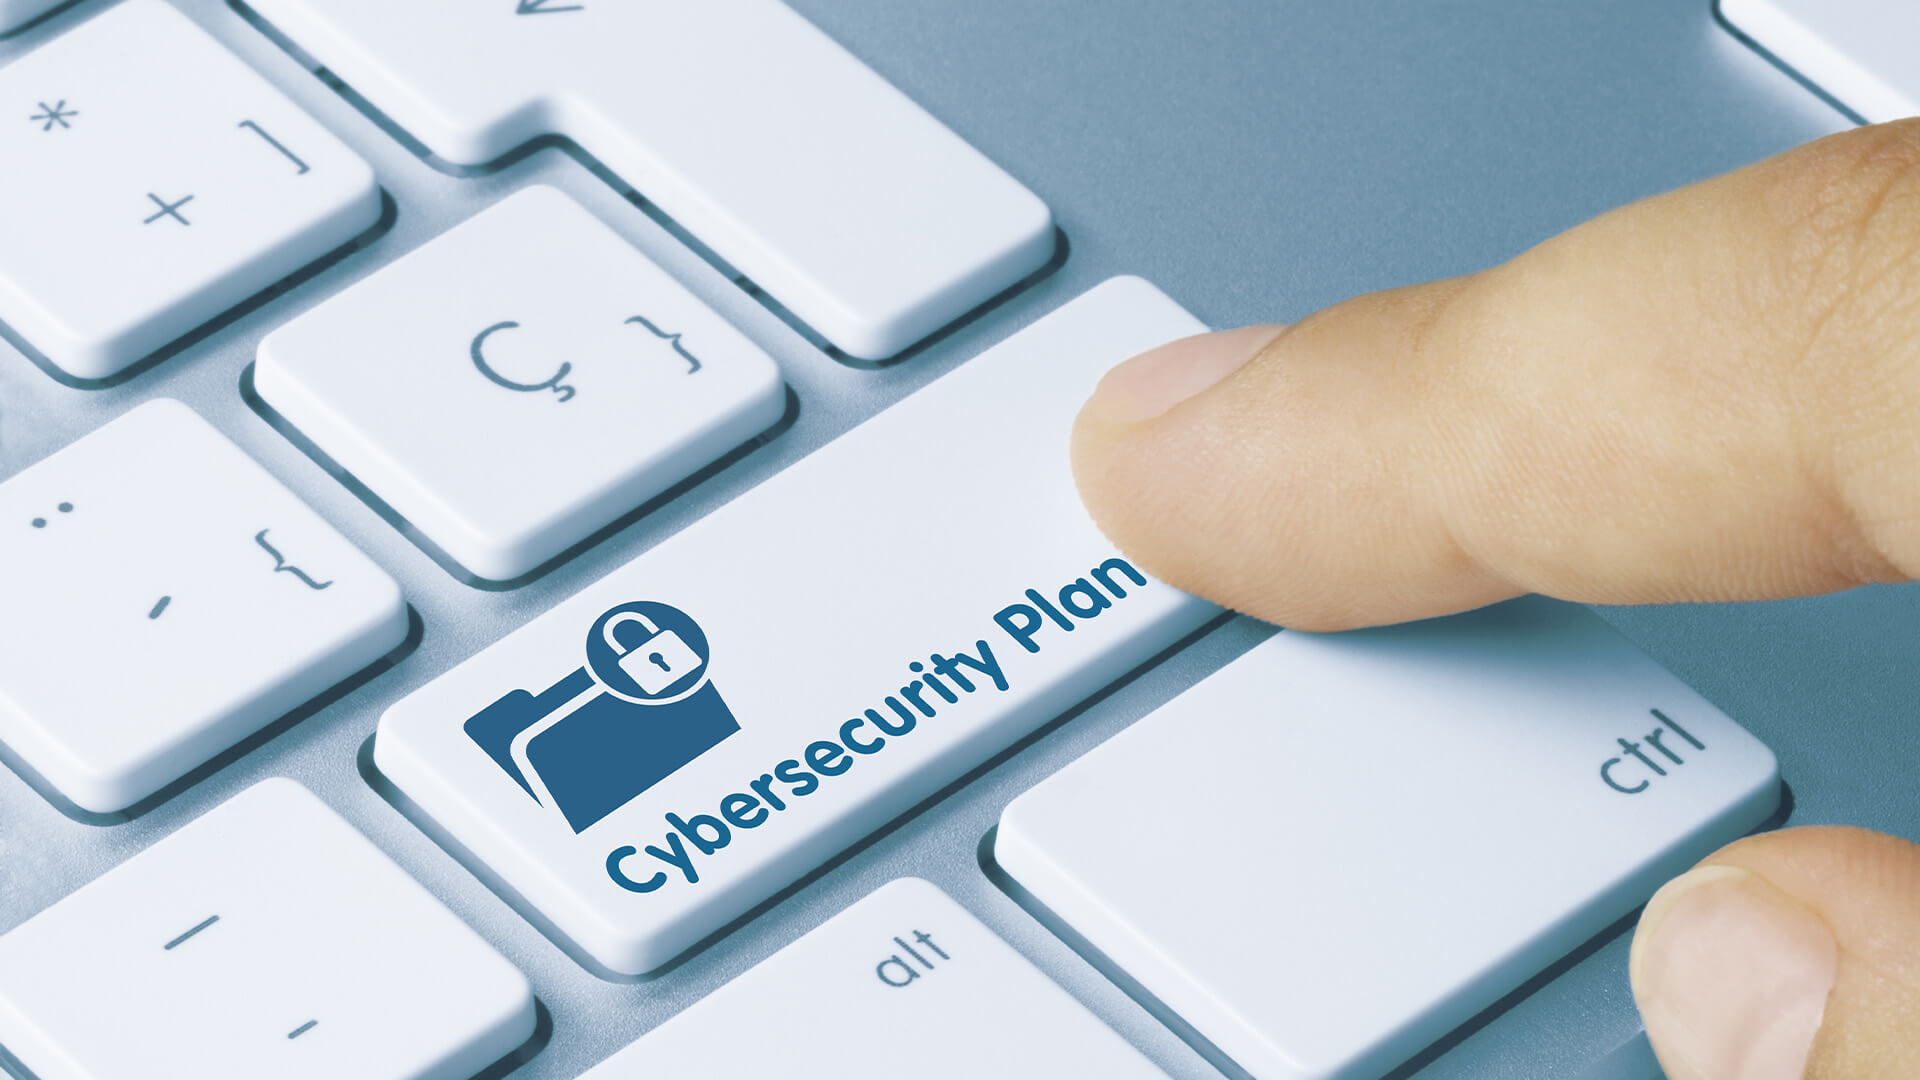 Cyber security plan